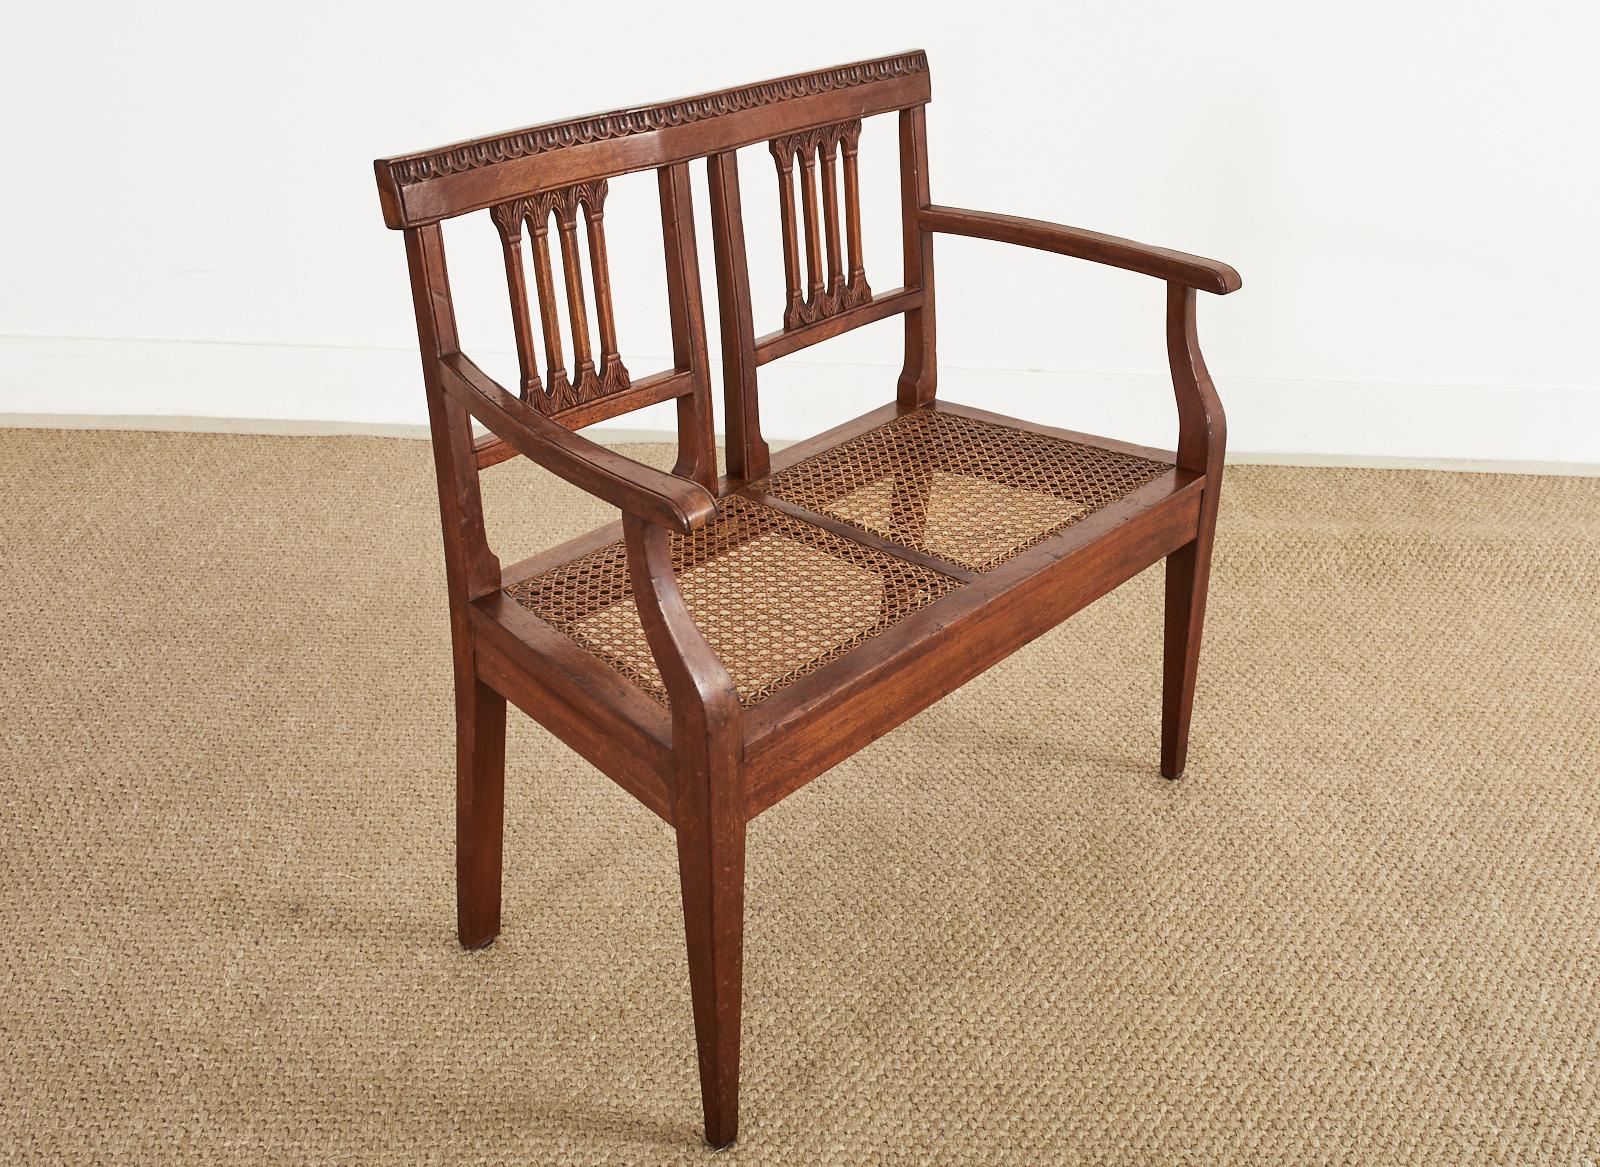 Italian Neoclassical Style Mahogany Cane Seat Bench Settee For Sale 6